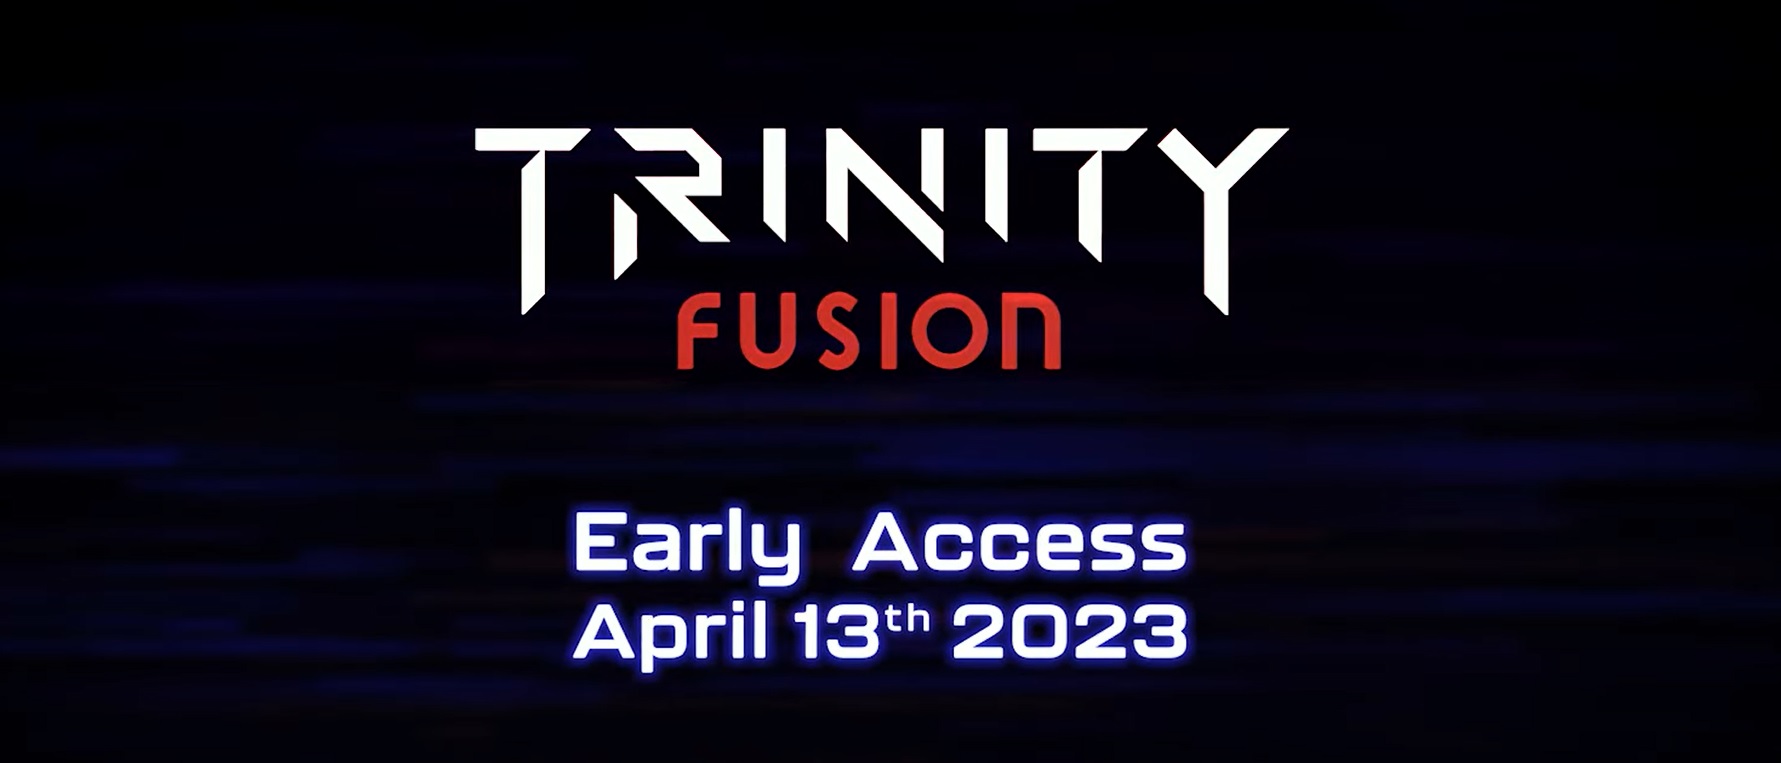 Trinity Fusion - Early Access Announcement Trailer